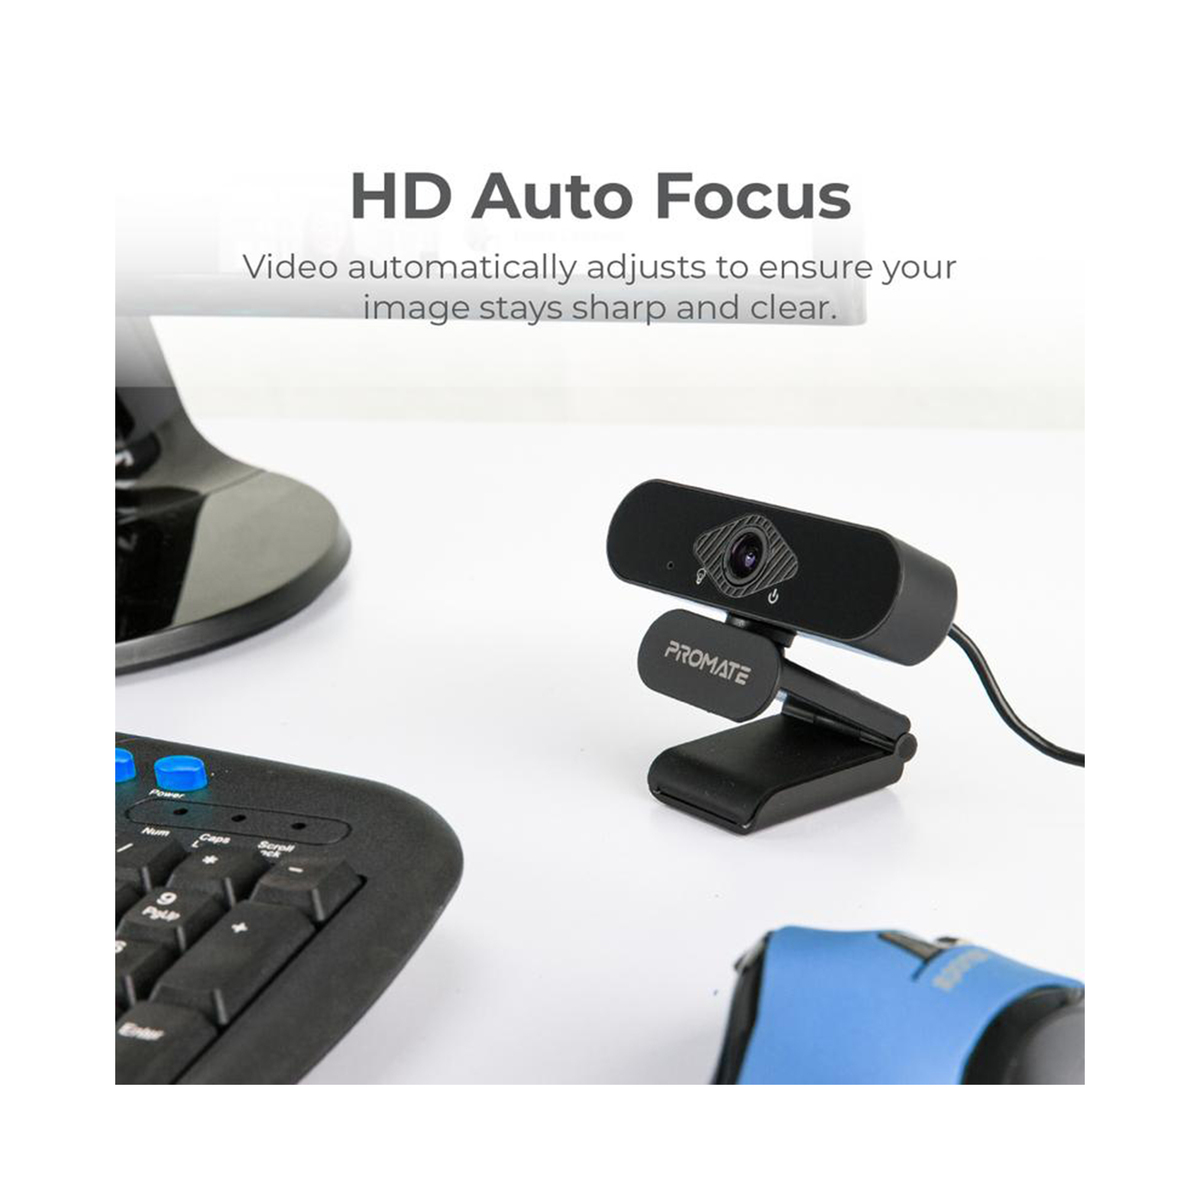 Promate Auto Focus Full-HD Pro WebCam with Built-In Mic PROCAM-2